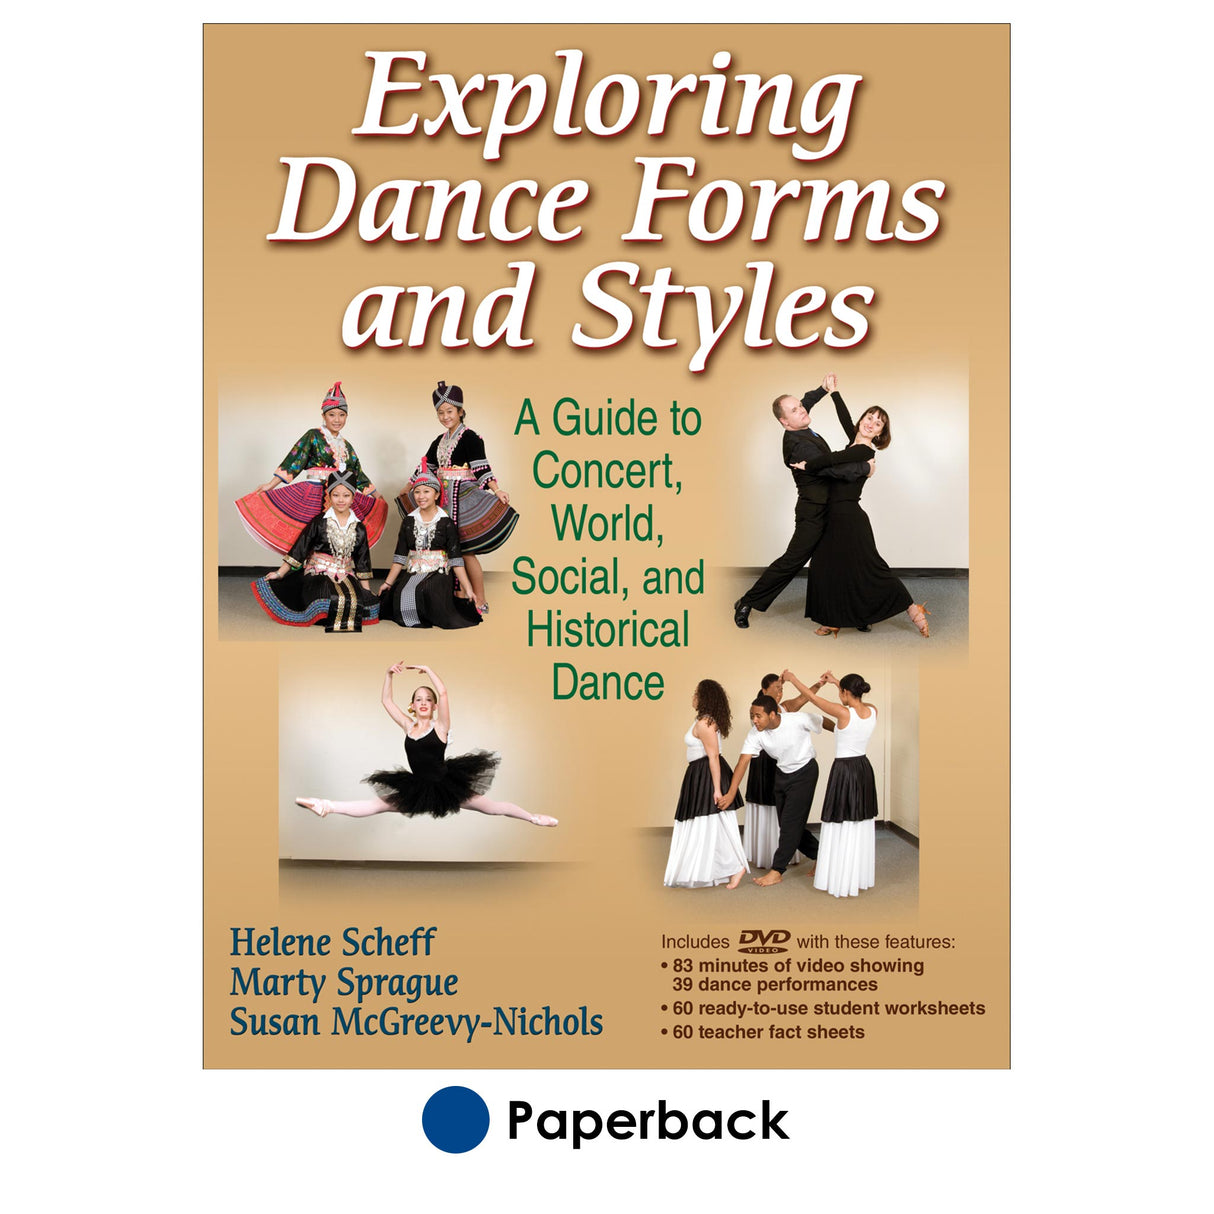 Exploring Dance Forms and Styles